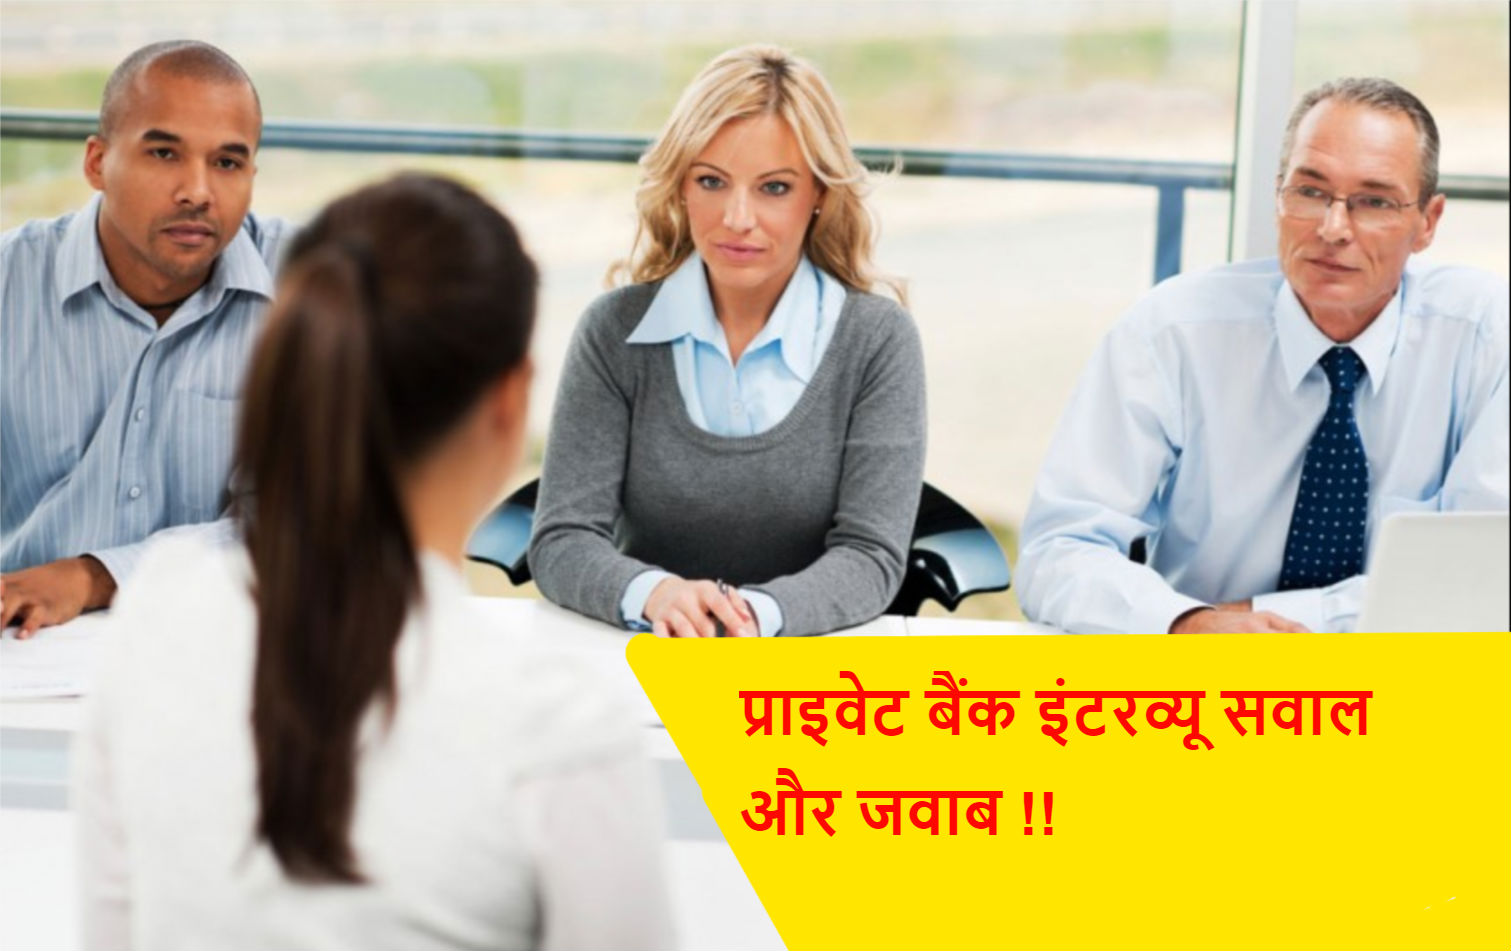 You are currently viewing Private bank interview questions and answers in Hindi !!